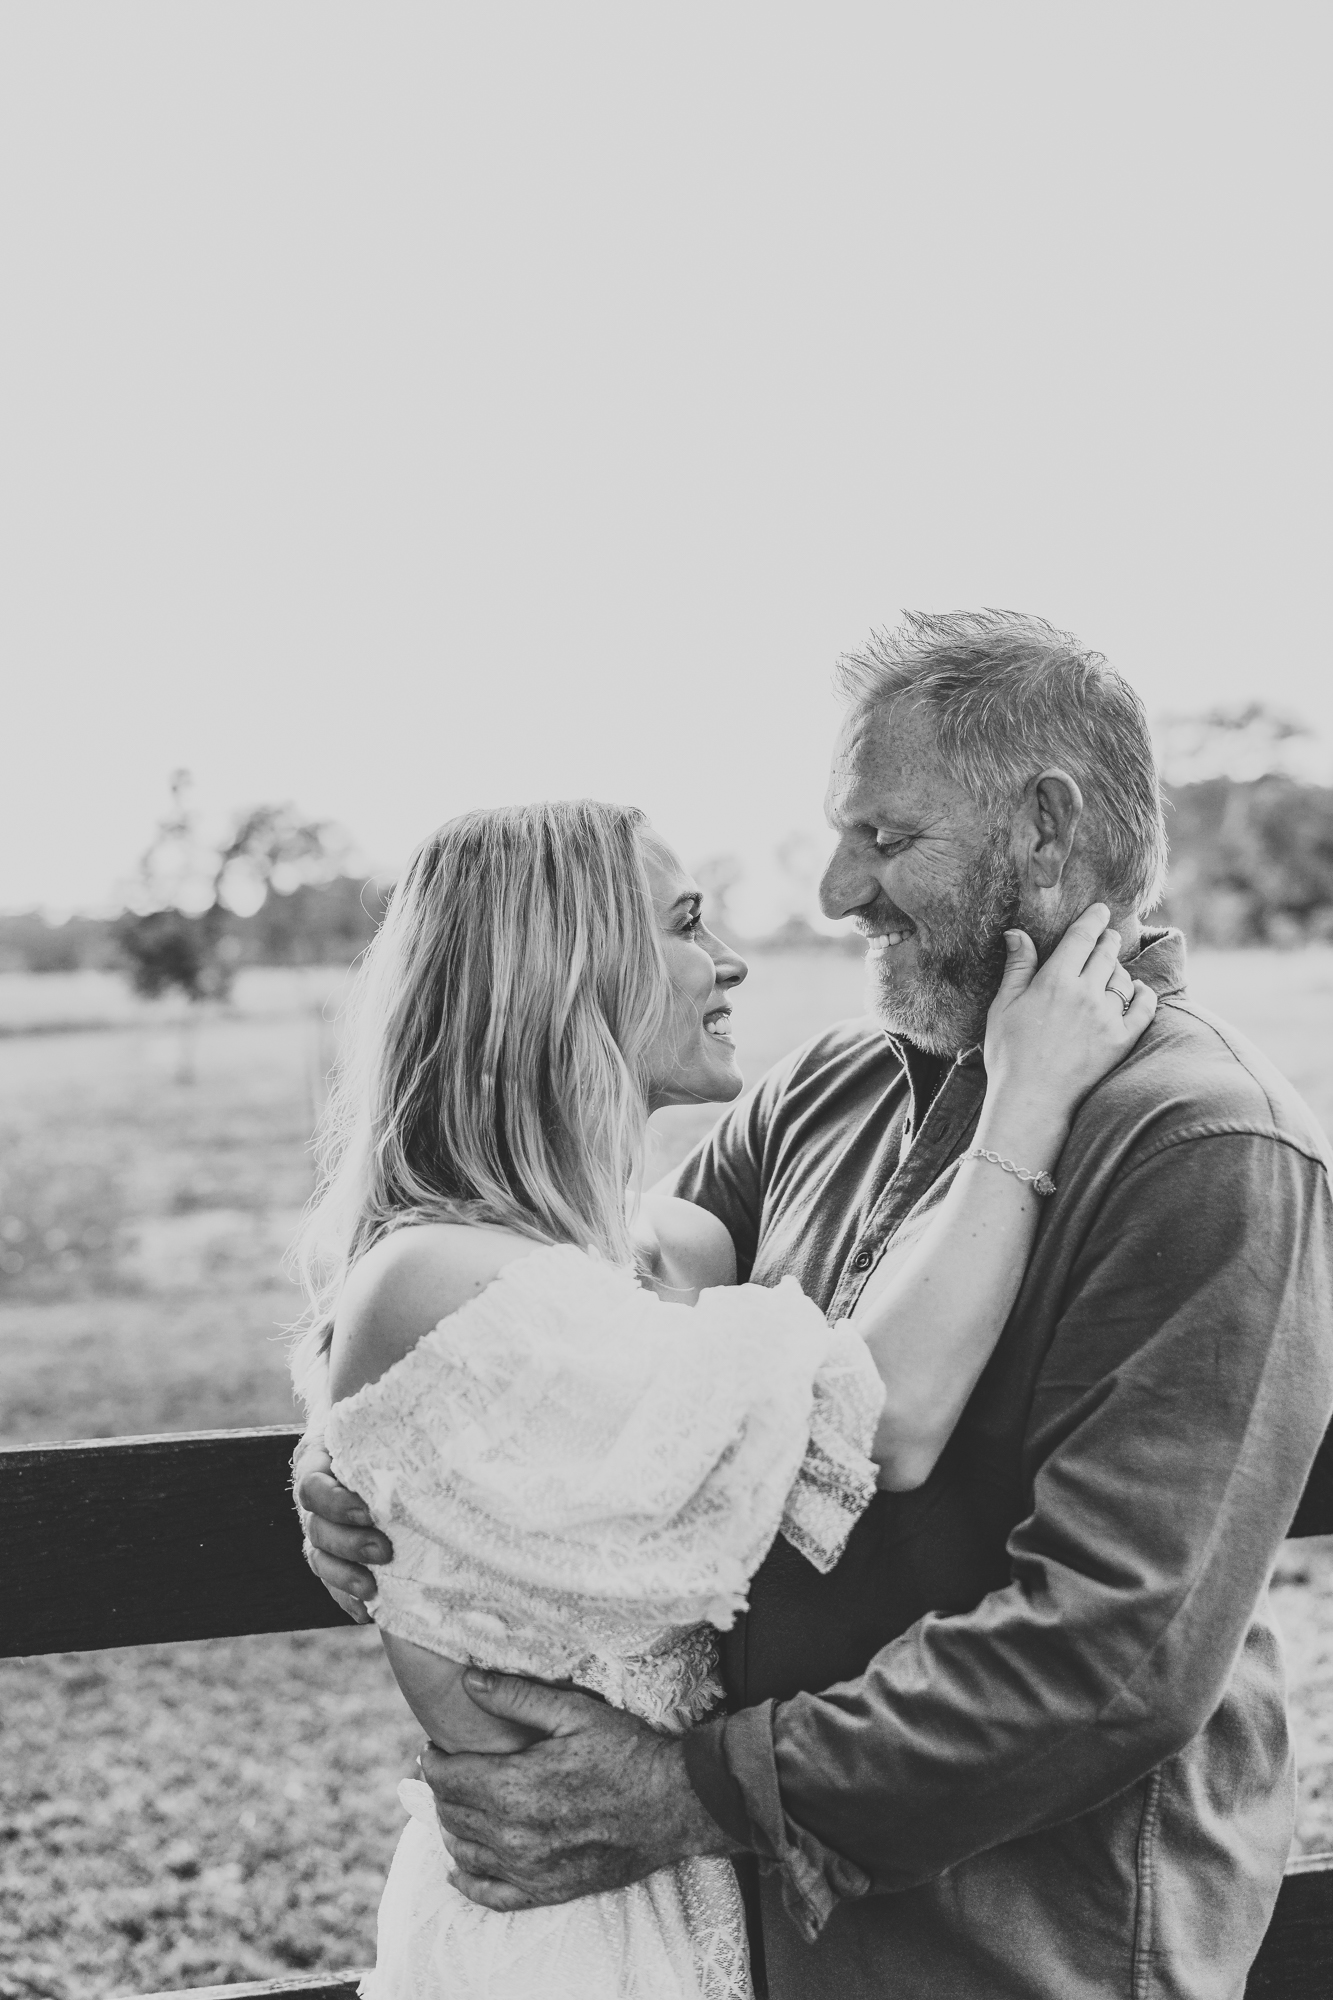 black and white image of a man holding his wife during a family portrait session, excitedly planning a romantic getaway in Texas.